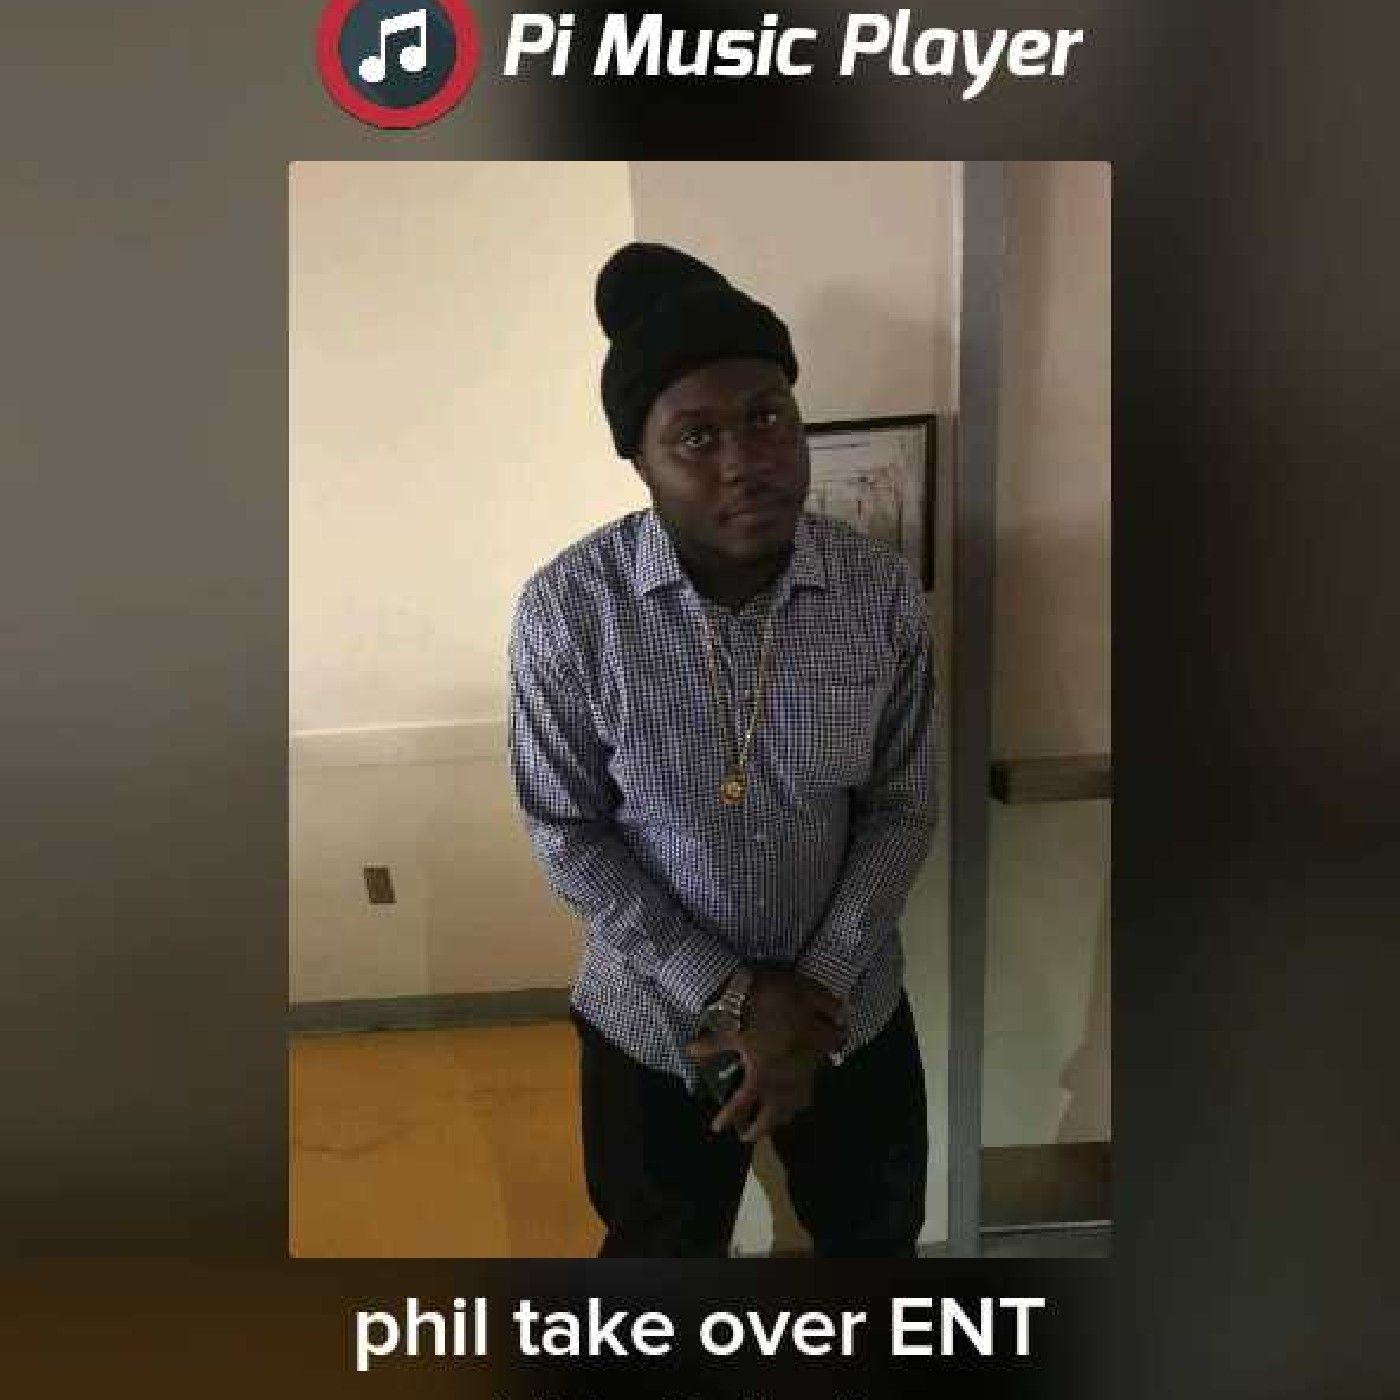 Phil takeover ENT